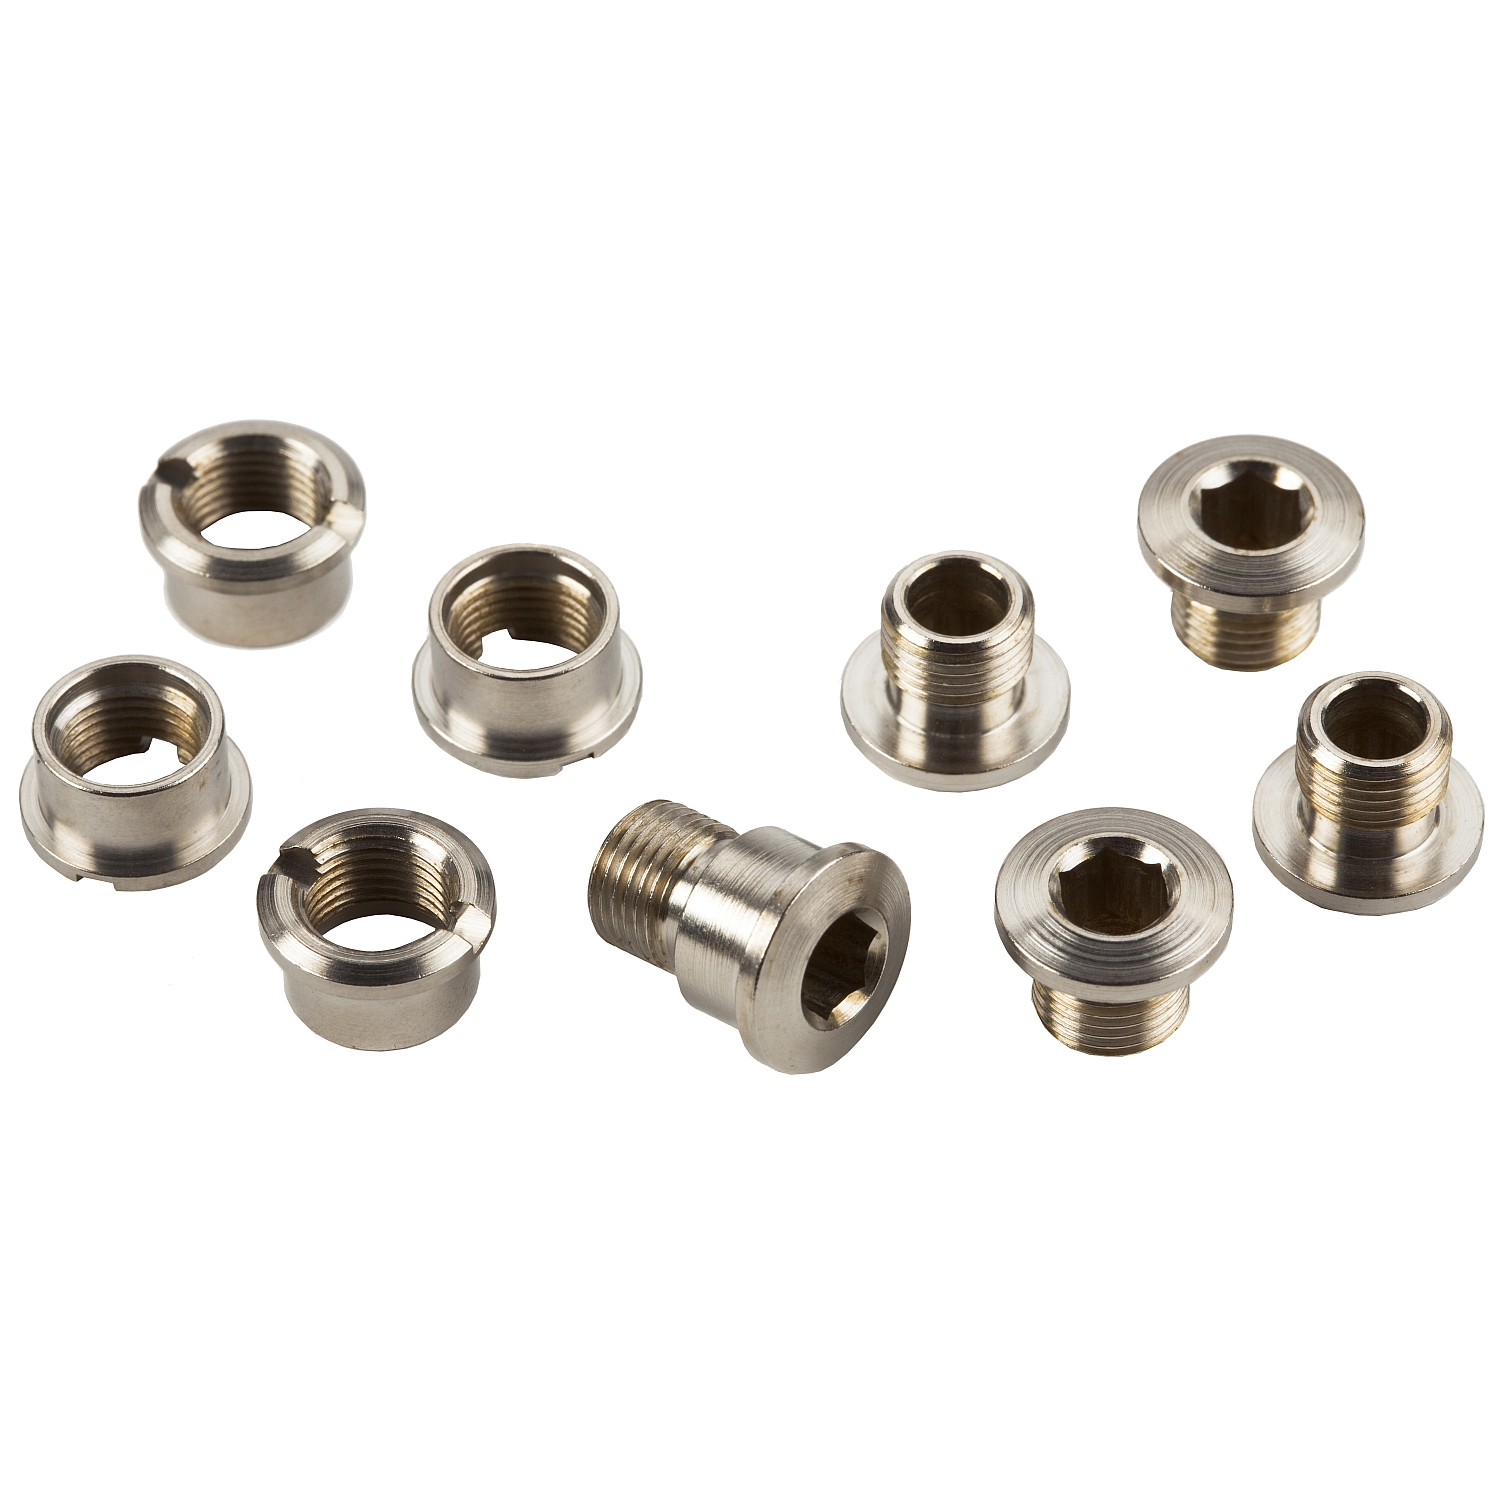 Image of Brompton Chain Ring Bolt Set - 5 Piece